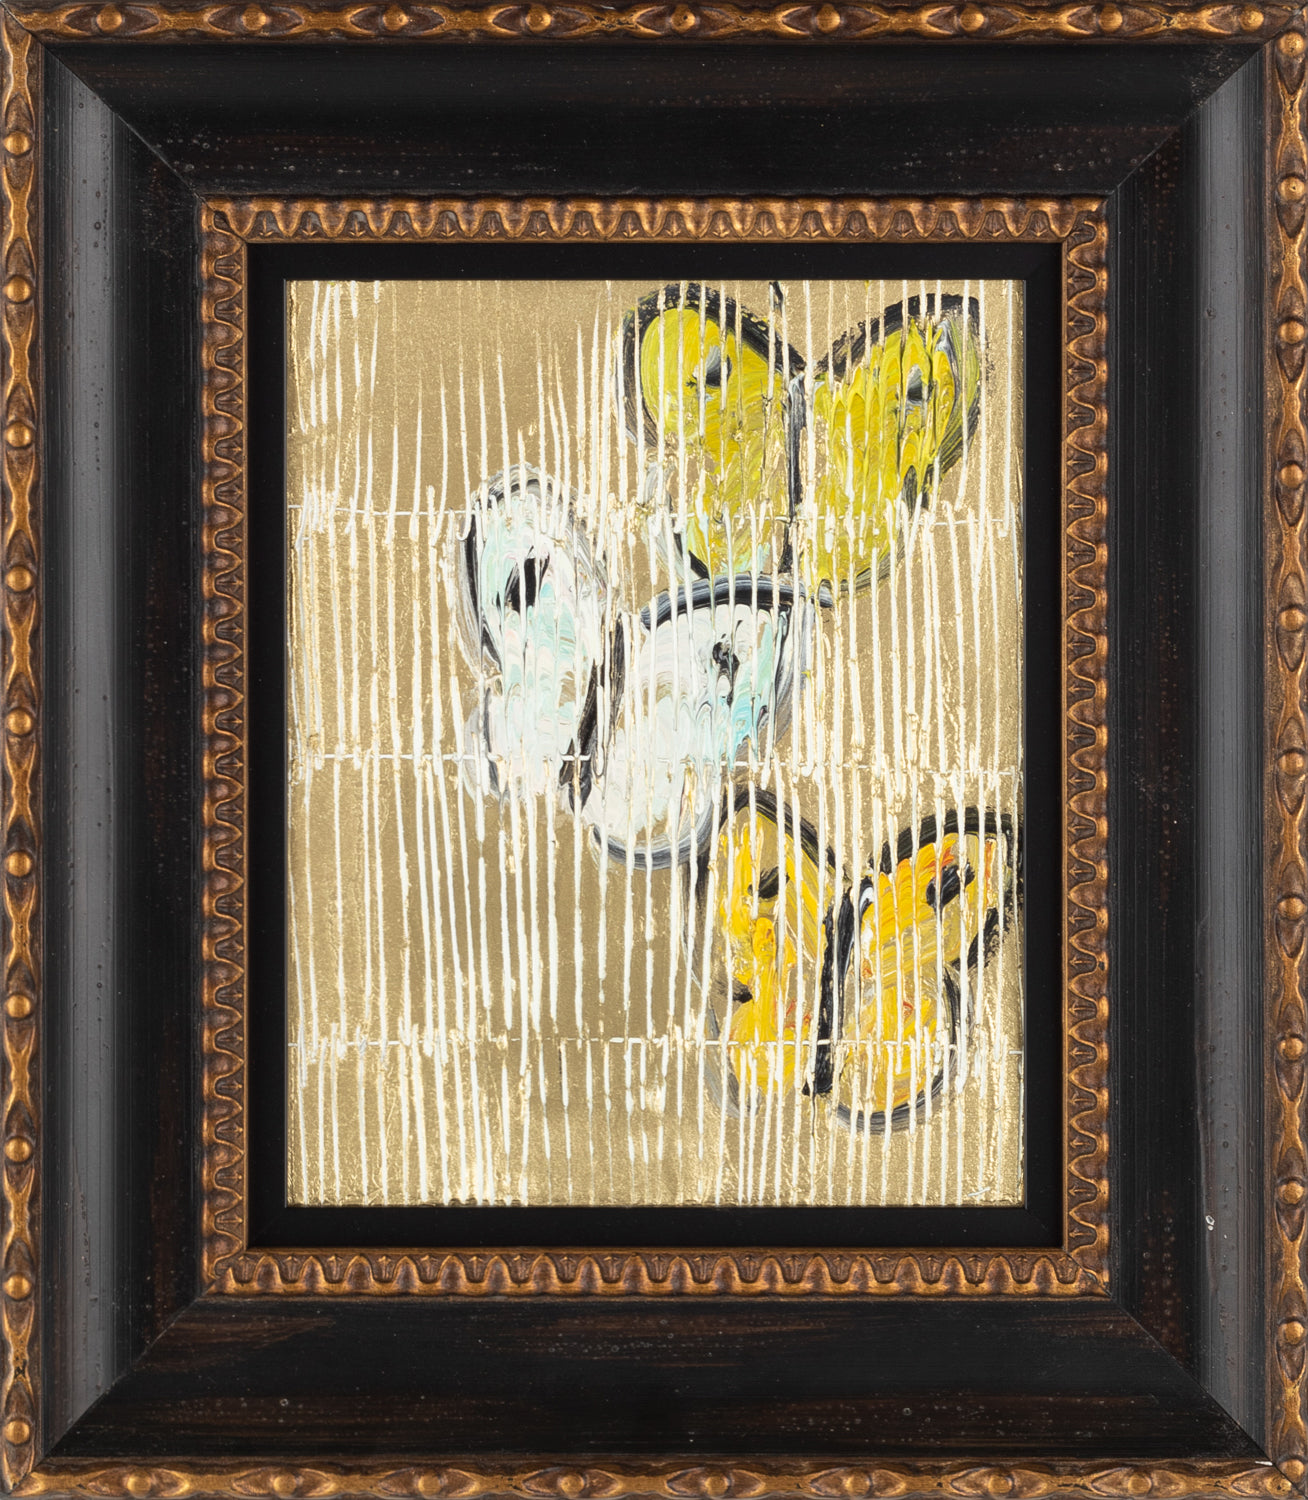 Gold Hunt Slonem butterfly painting “Untitled,”2019, Oil on wood, 10 x 8 inches, in antique black and gold frame, Hunt Slonem Butterflies for sale at Manolis Projects Gallery